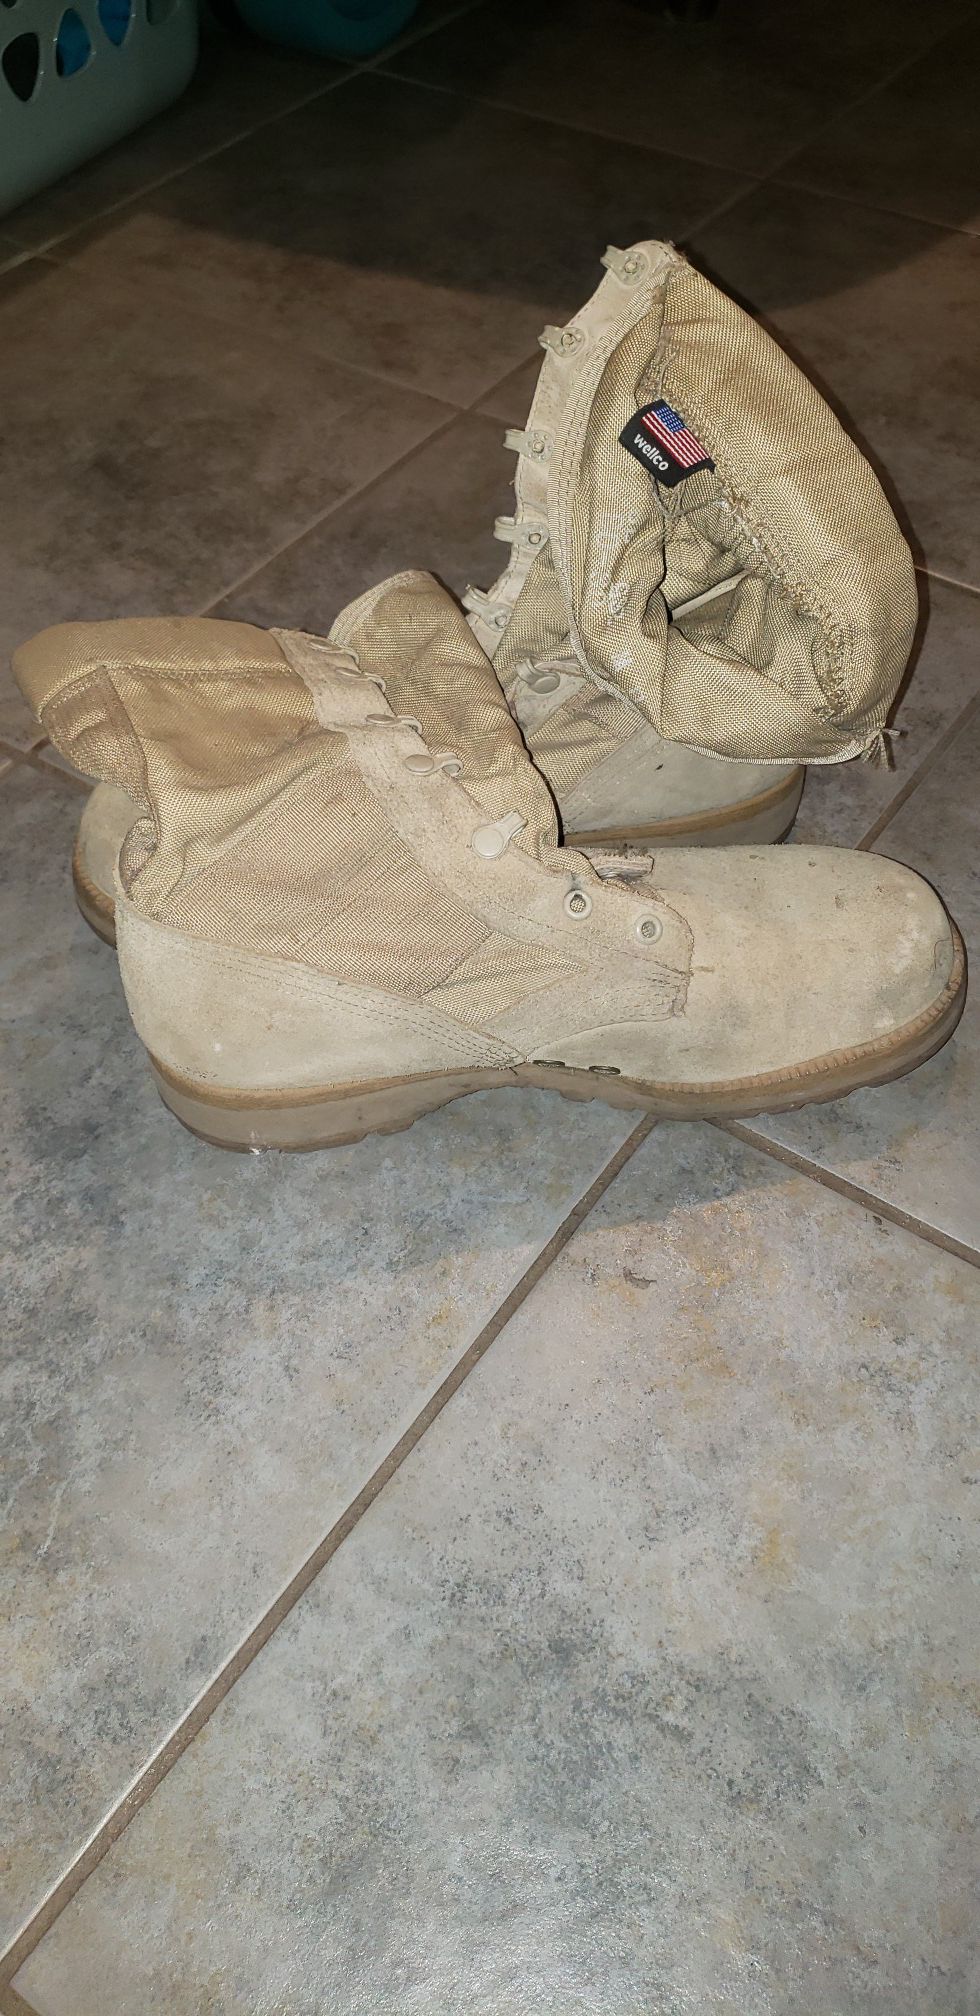 Military Desert boots, no laces